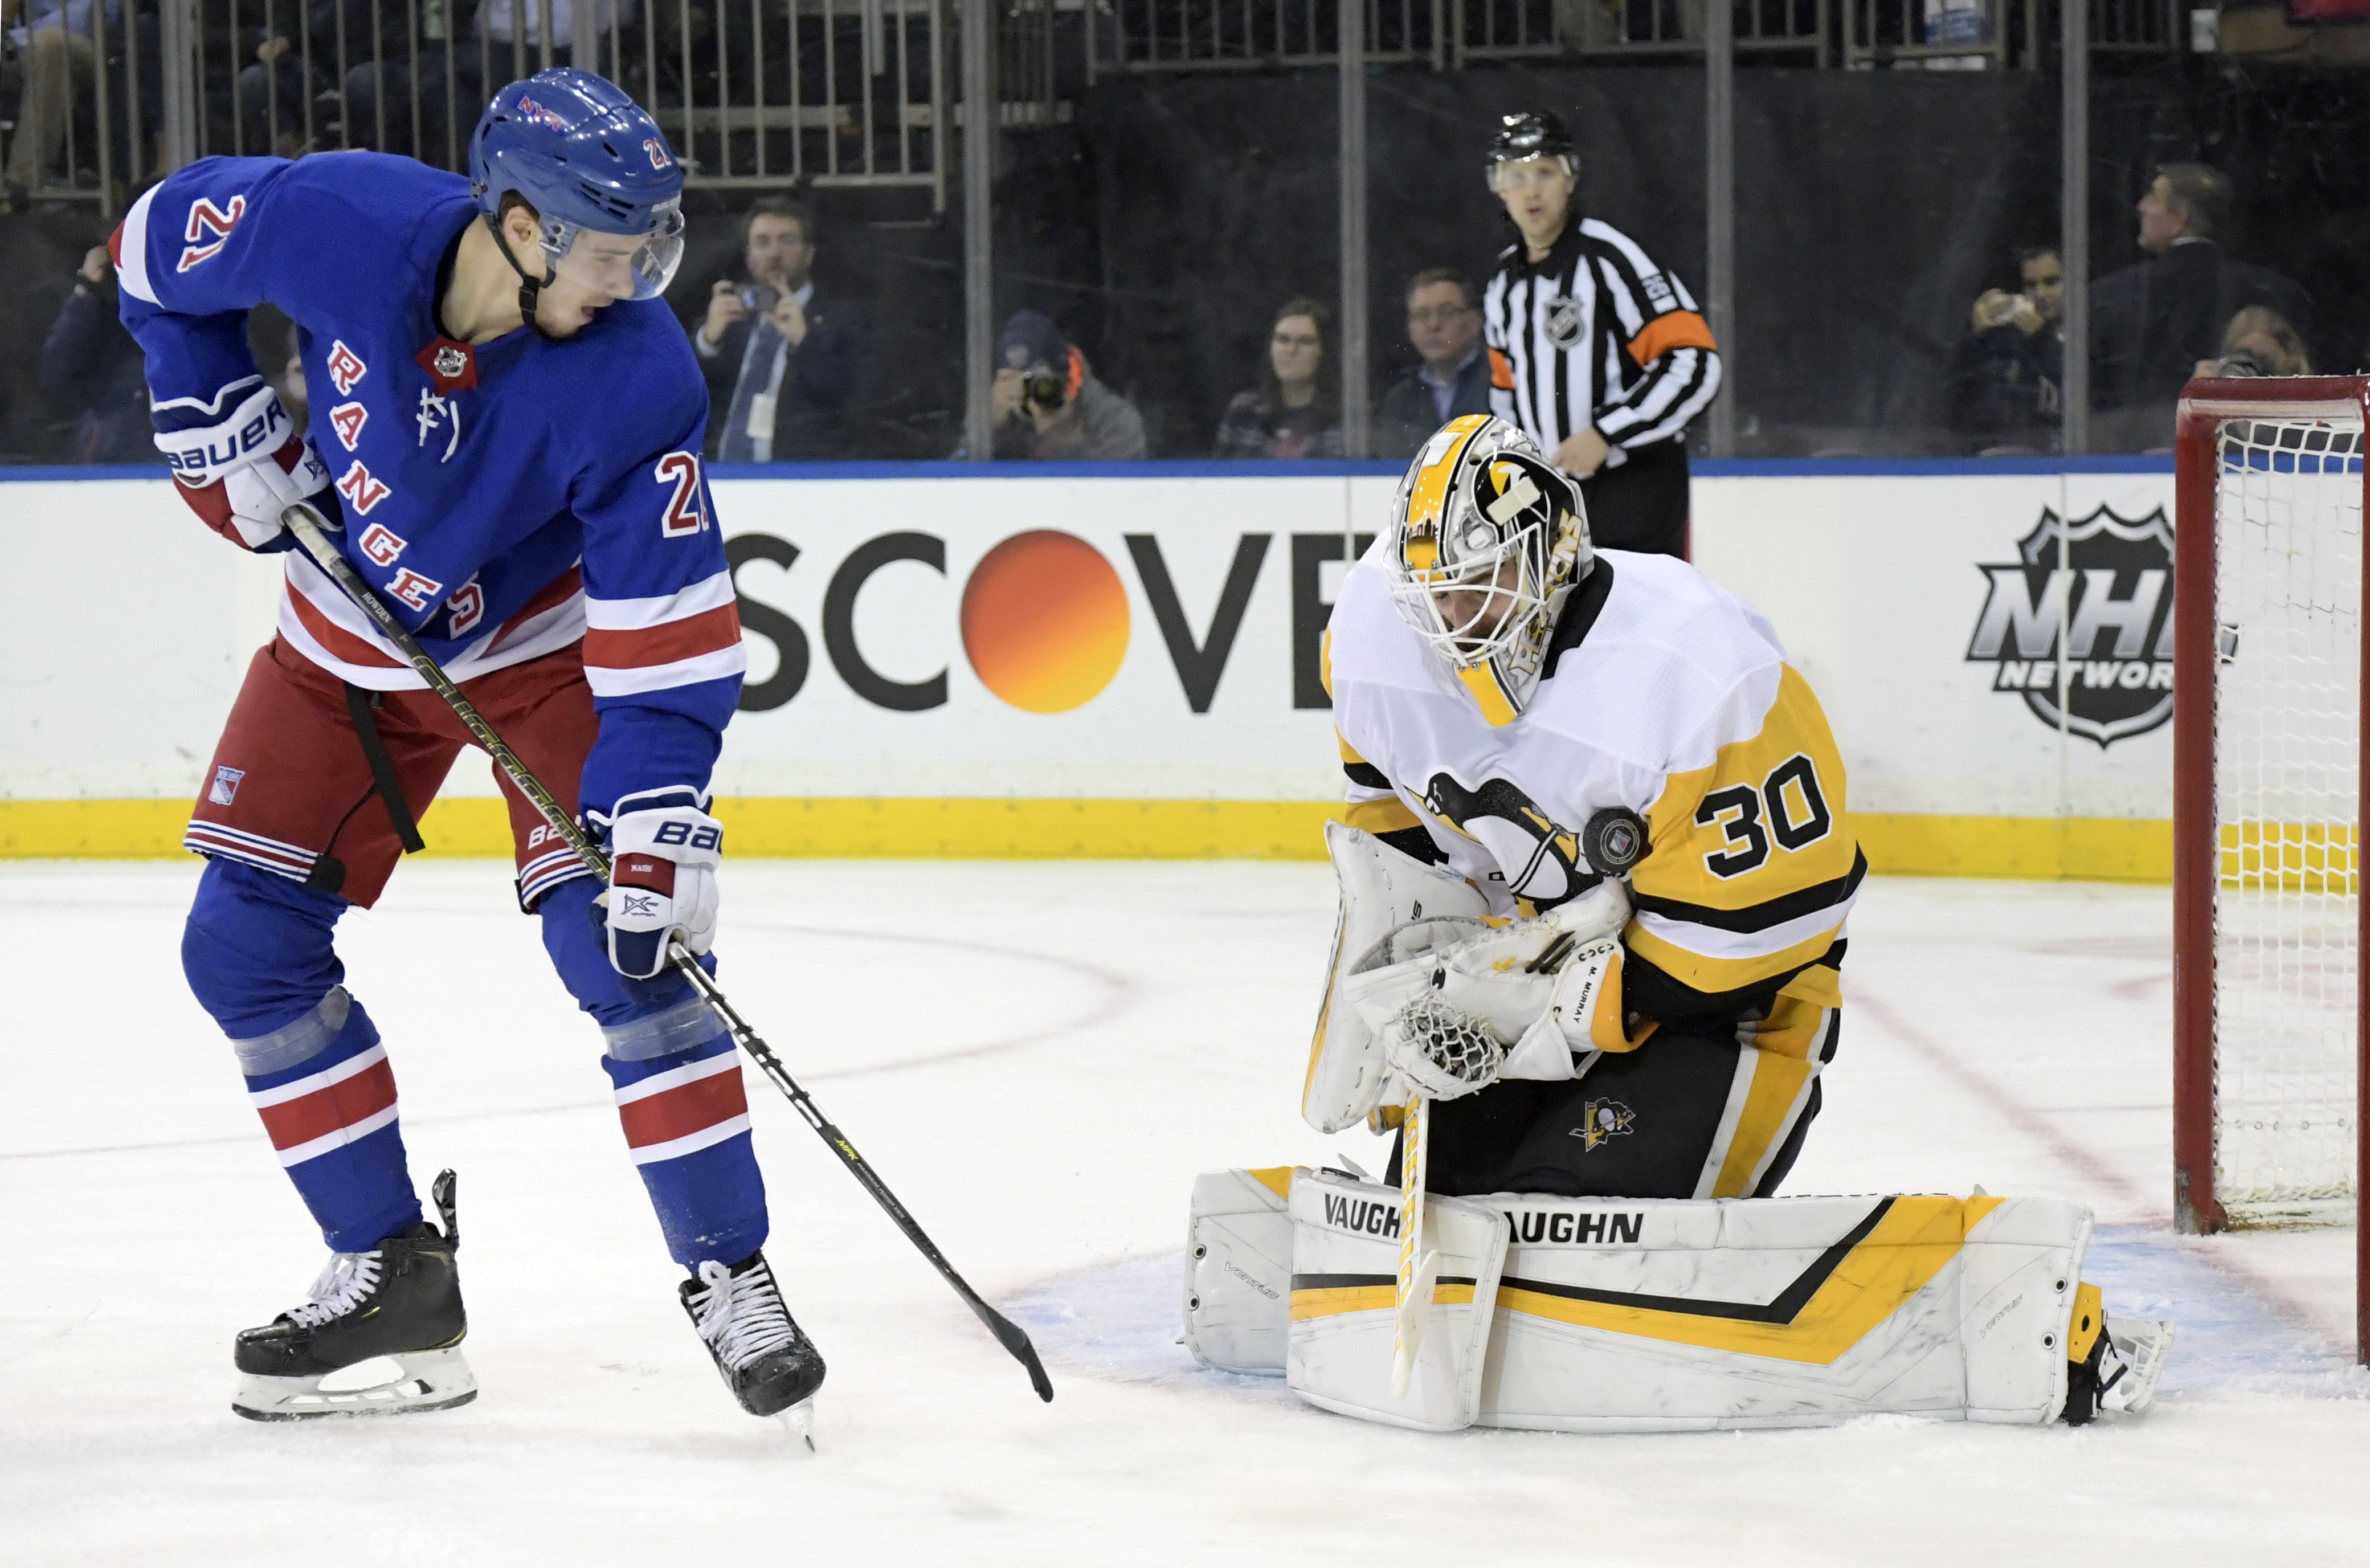 Murray helps Penguins beat Rangers 7-2 for 7th straight win